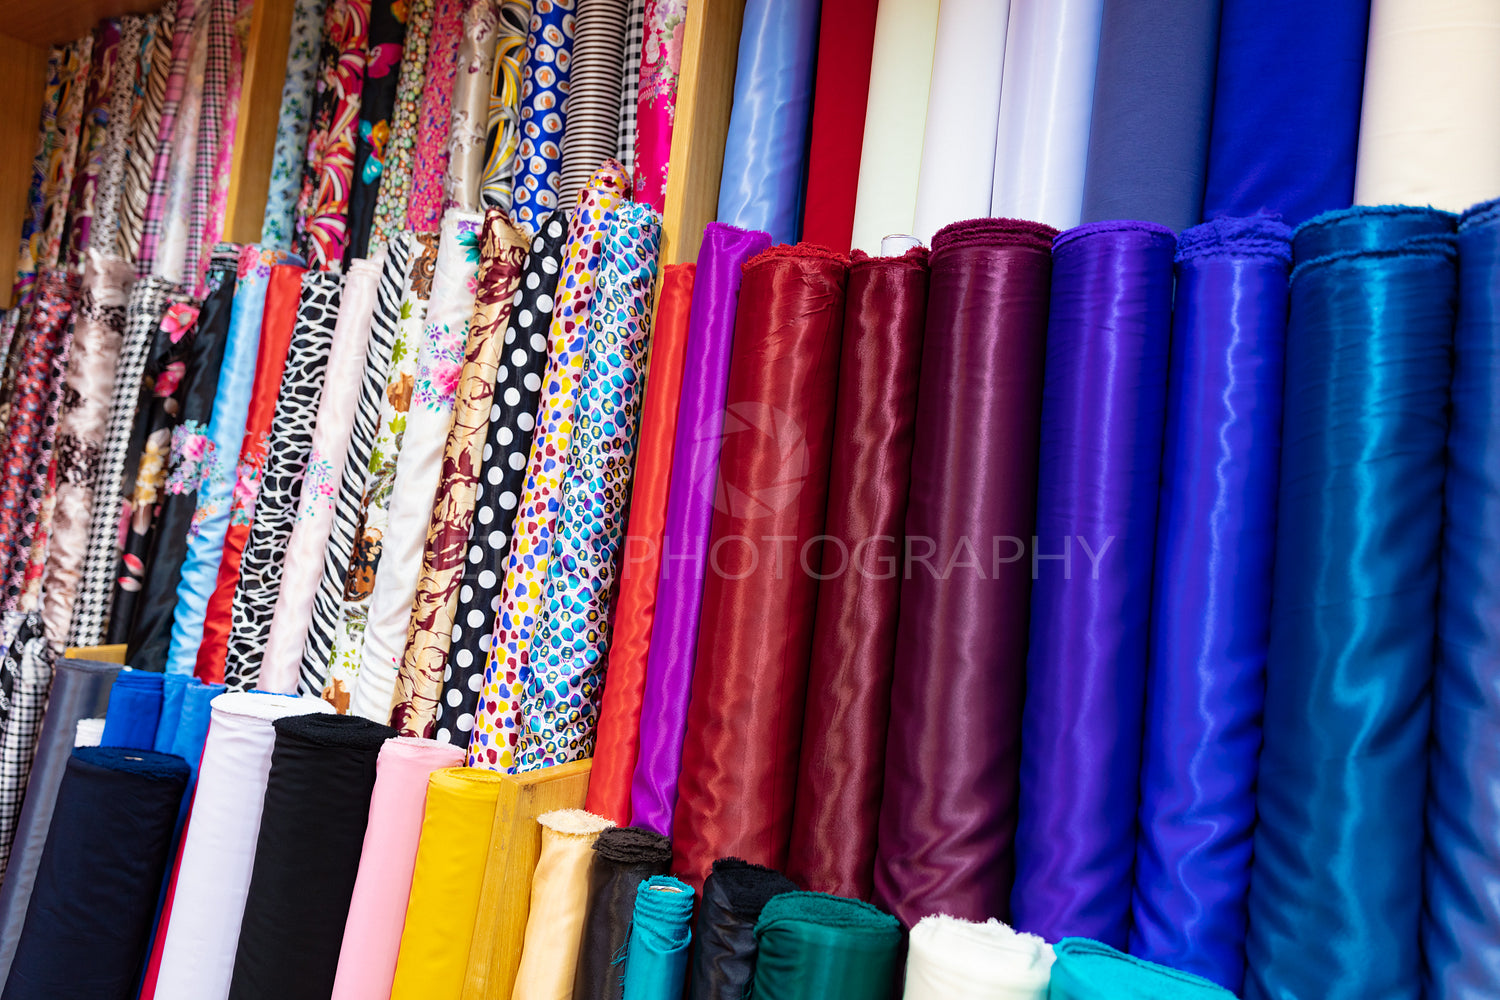 Colorful Cloths For Sale At Store